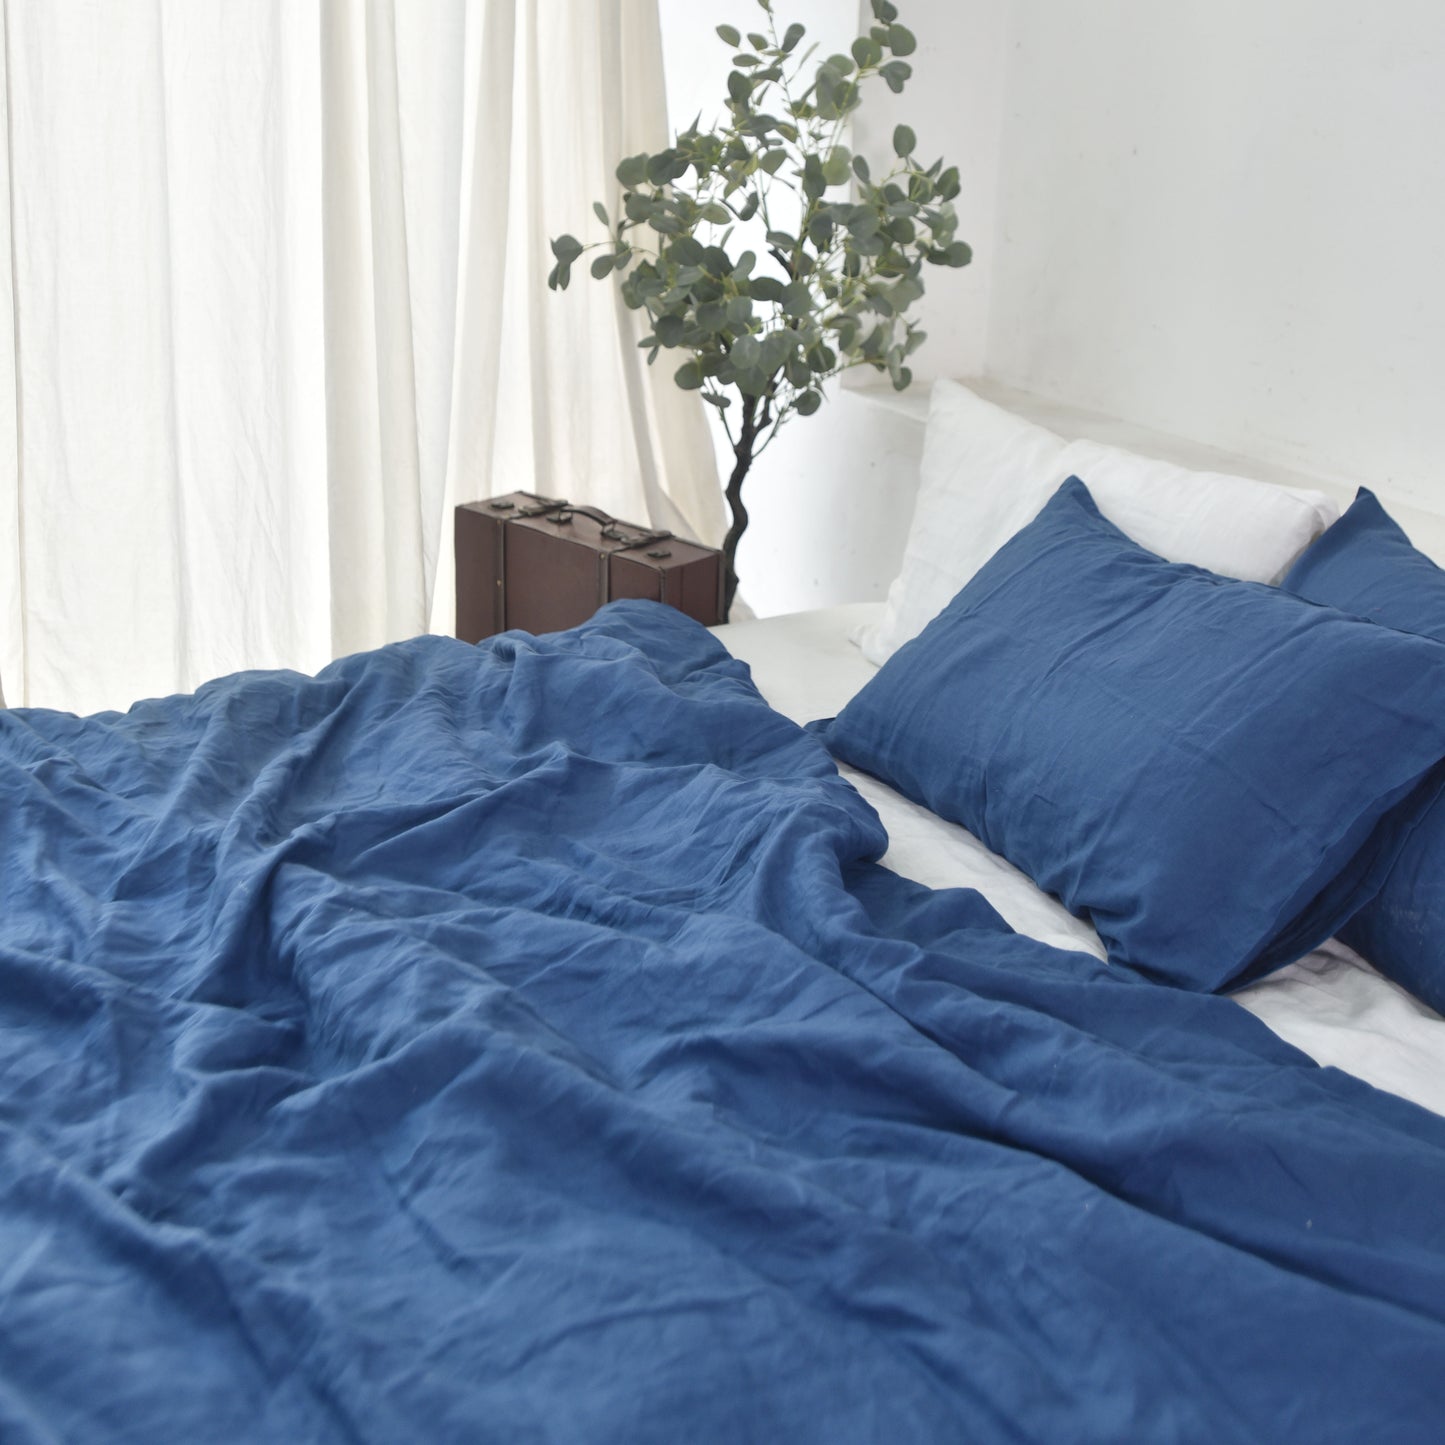 Sky French Linen Bedding Sets (4 pieces) -  Plain Dyeing